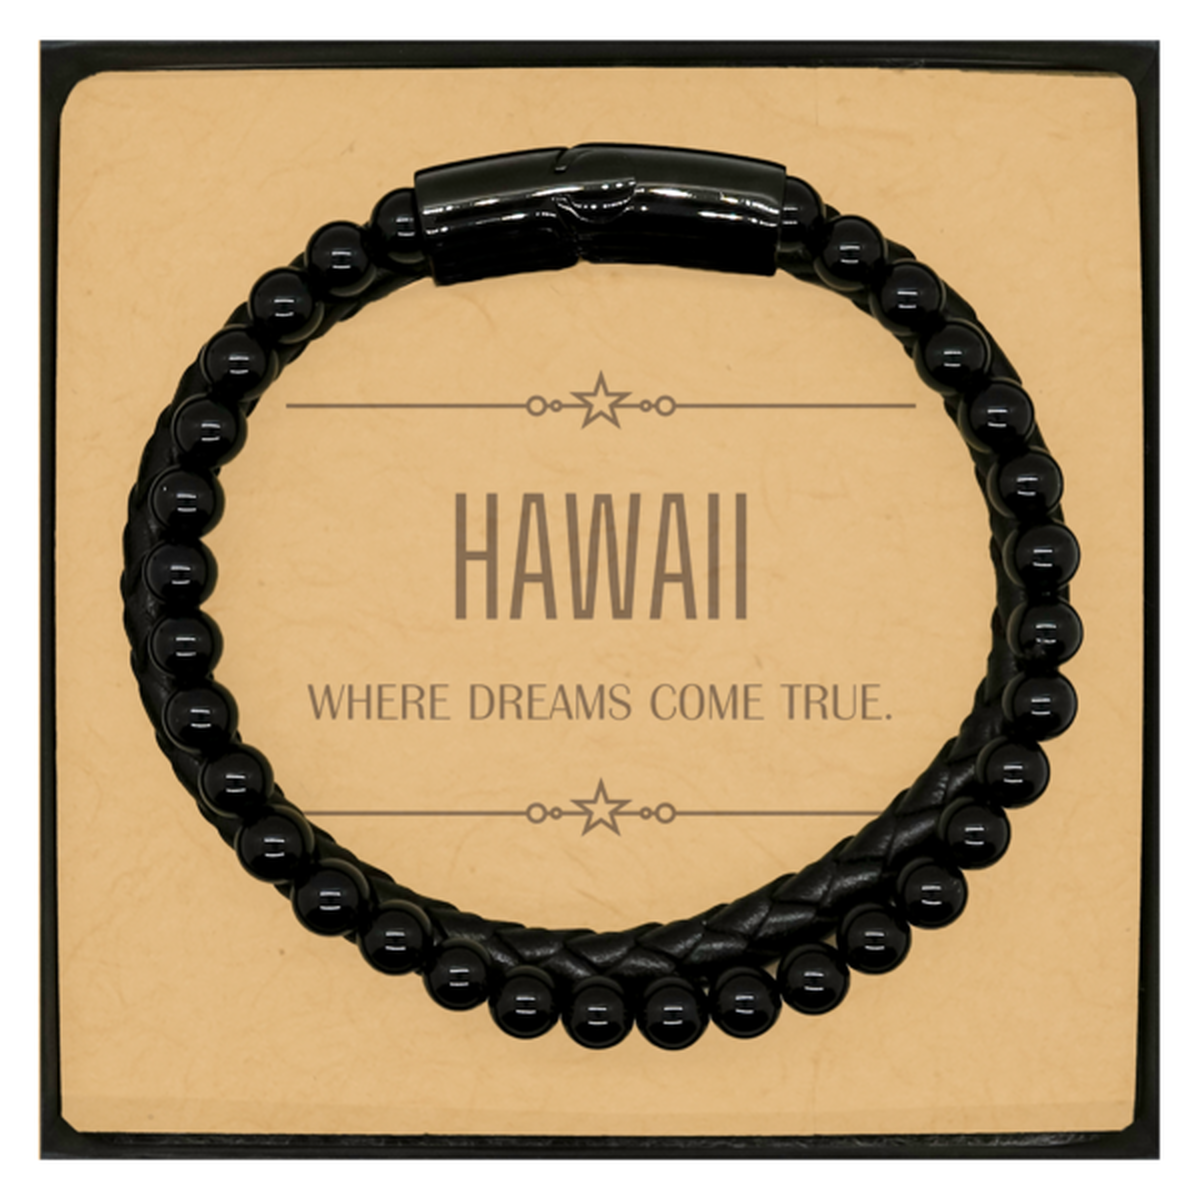 Love Hawaii State Stone Leather Bracelets, Hawaii Where dreams come true, Birthday Christmas Inspirational Gifts For Hawaii Men, Women, Friends